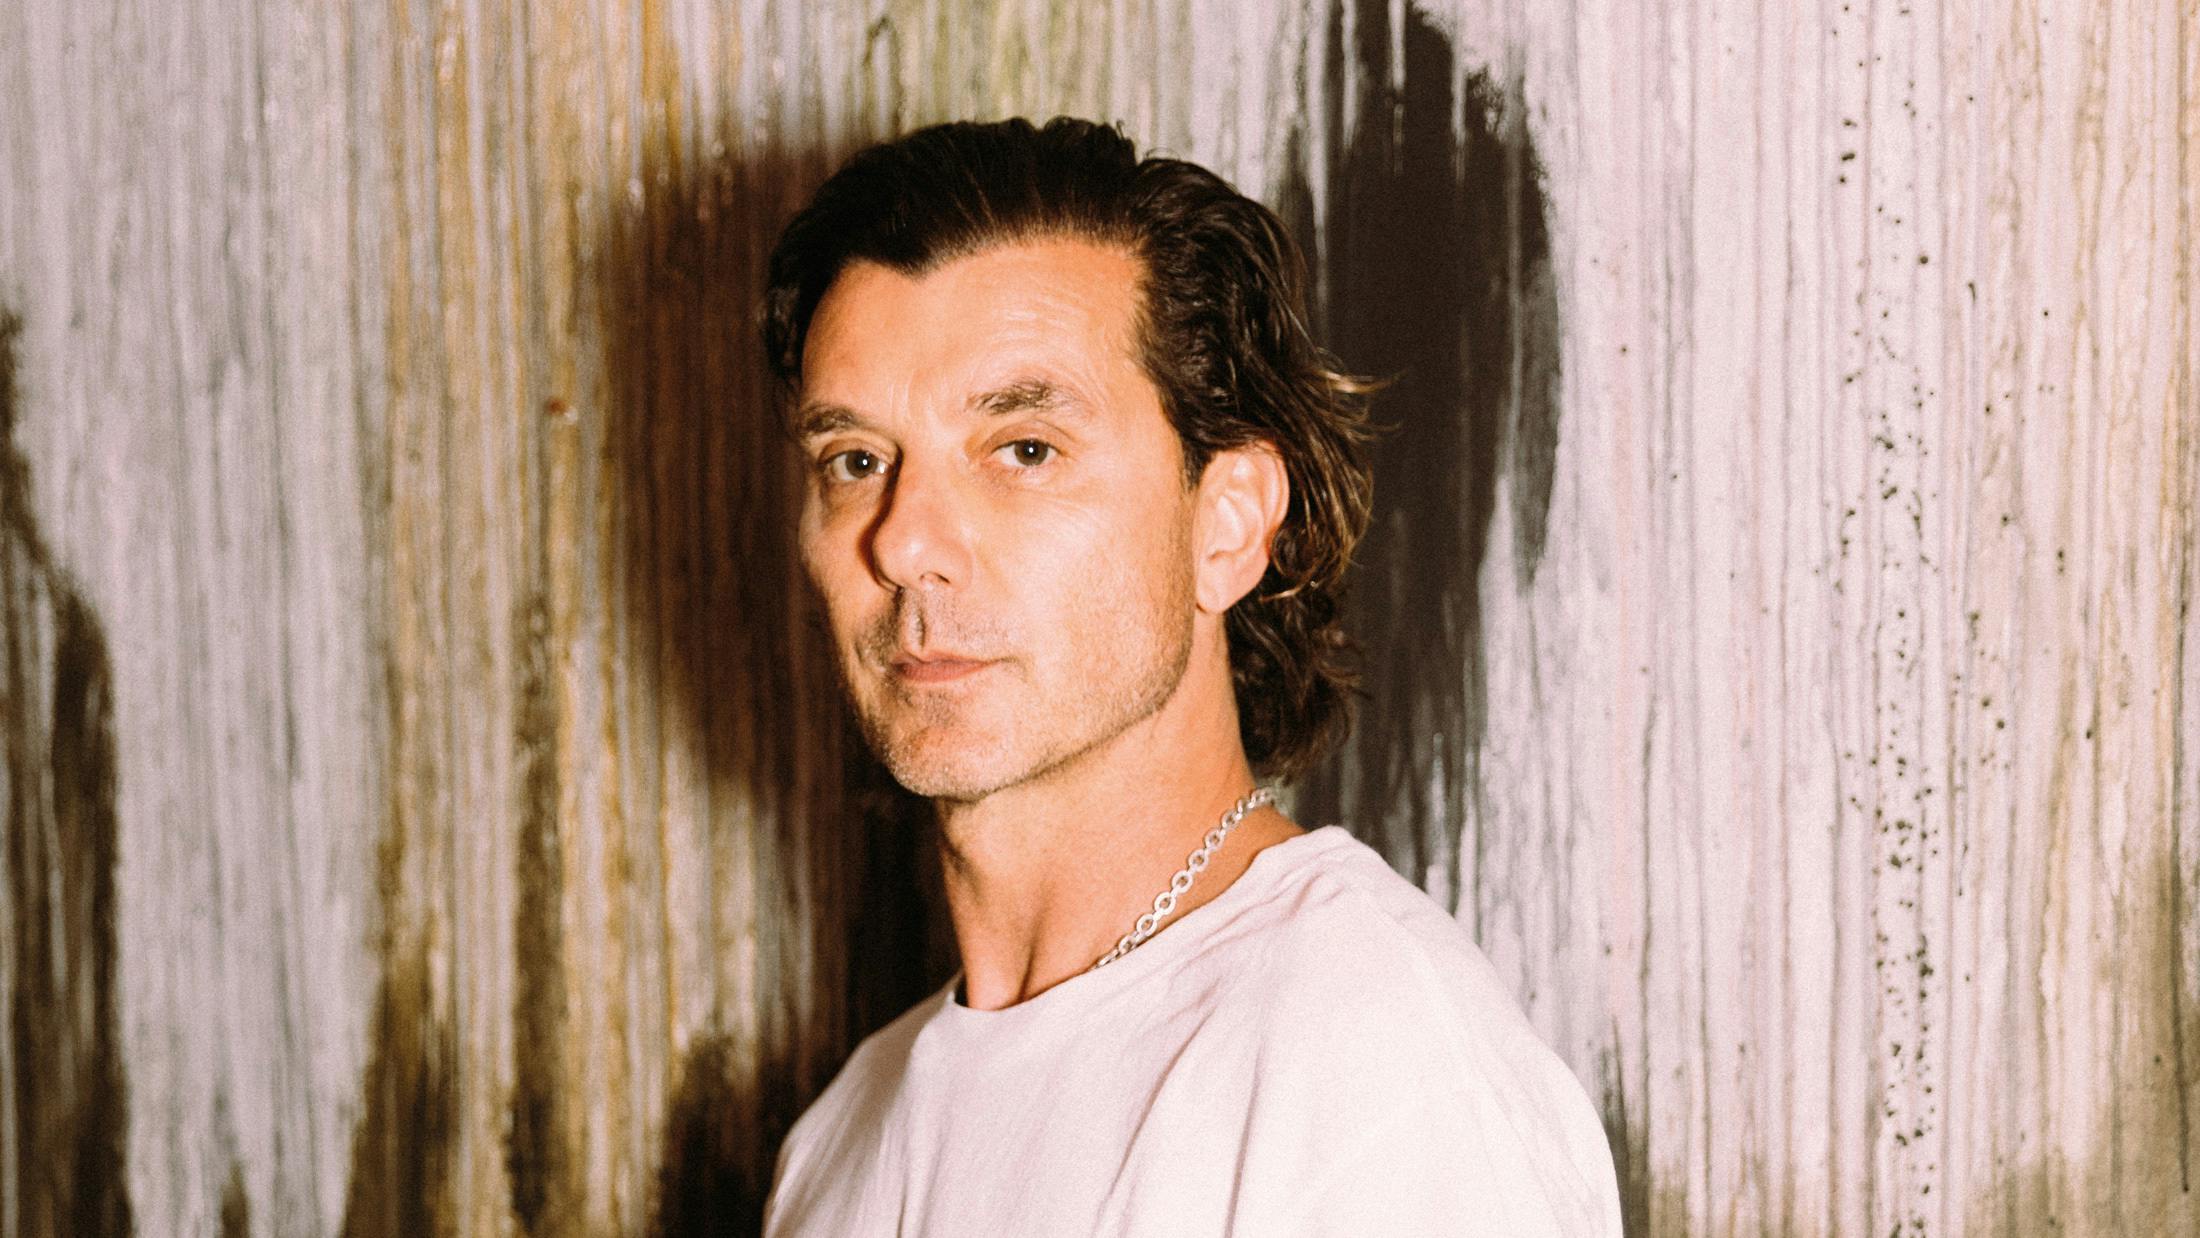 Bush's Gavin Rossdale: "When you're really successful you get headbutted often, and we got hit a lot! But I'm half-Scottish, I can take it"